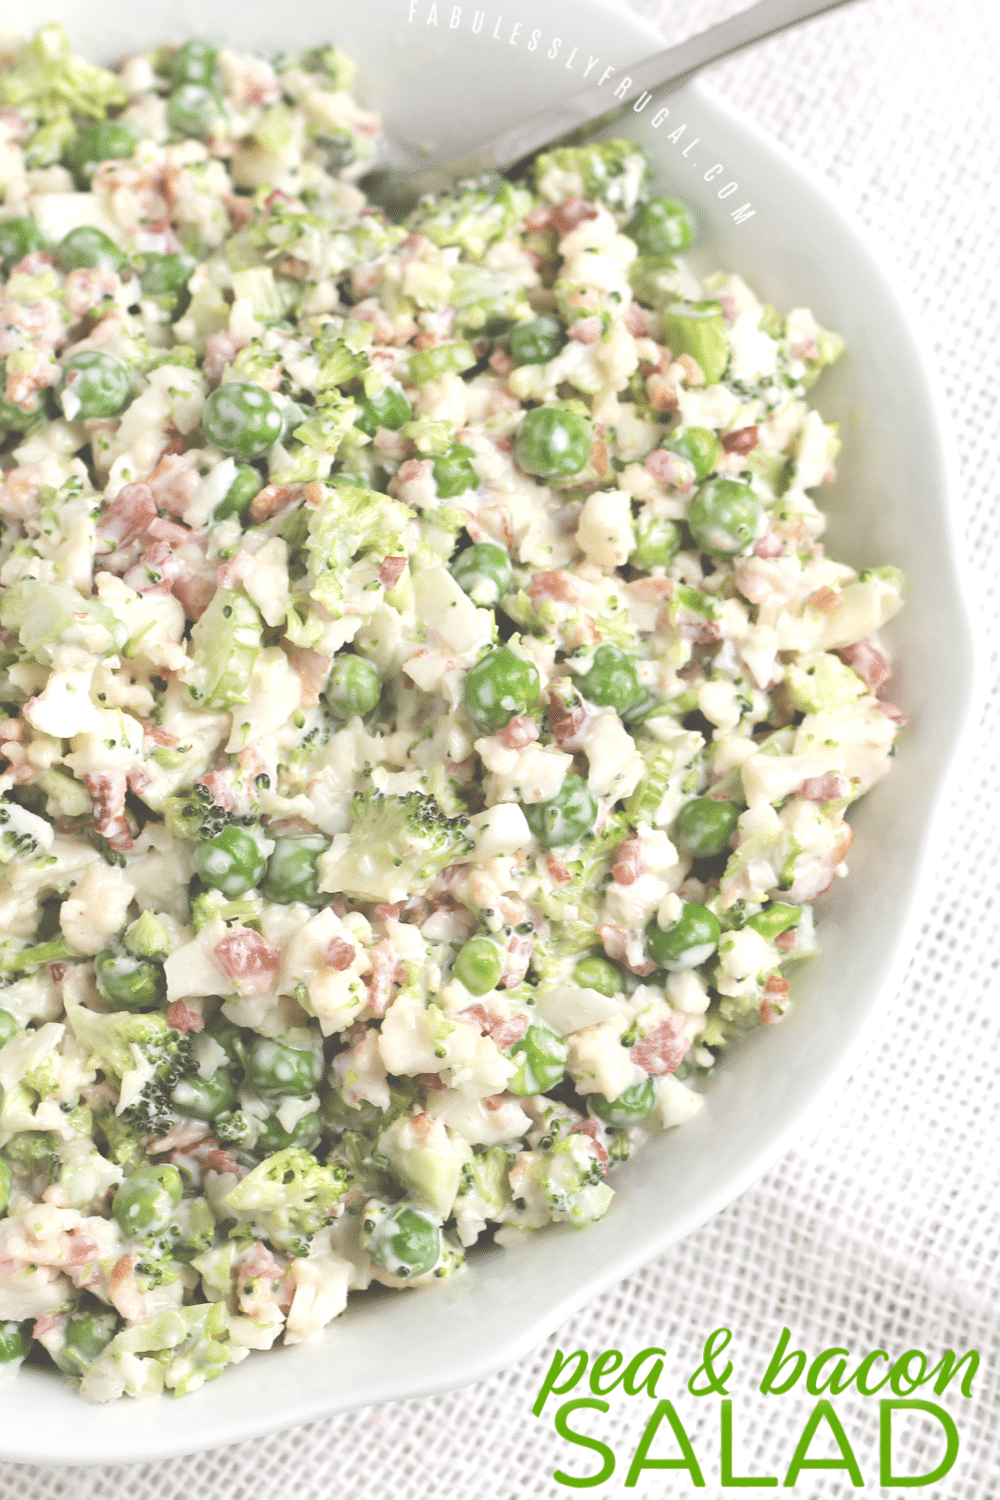 Cold pea and bacon salad